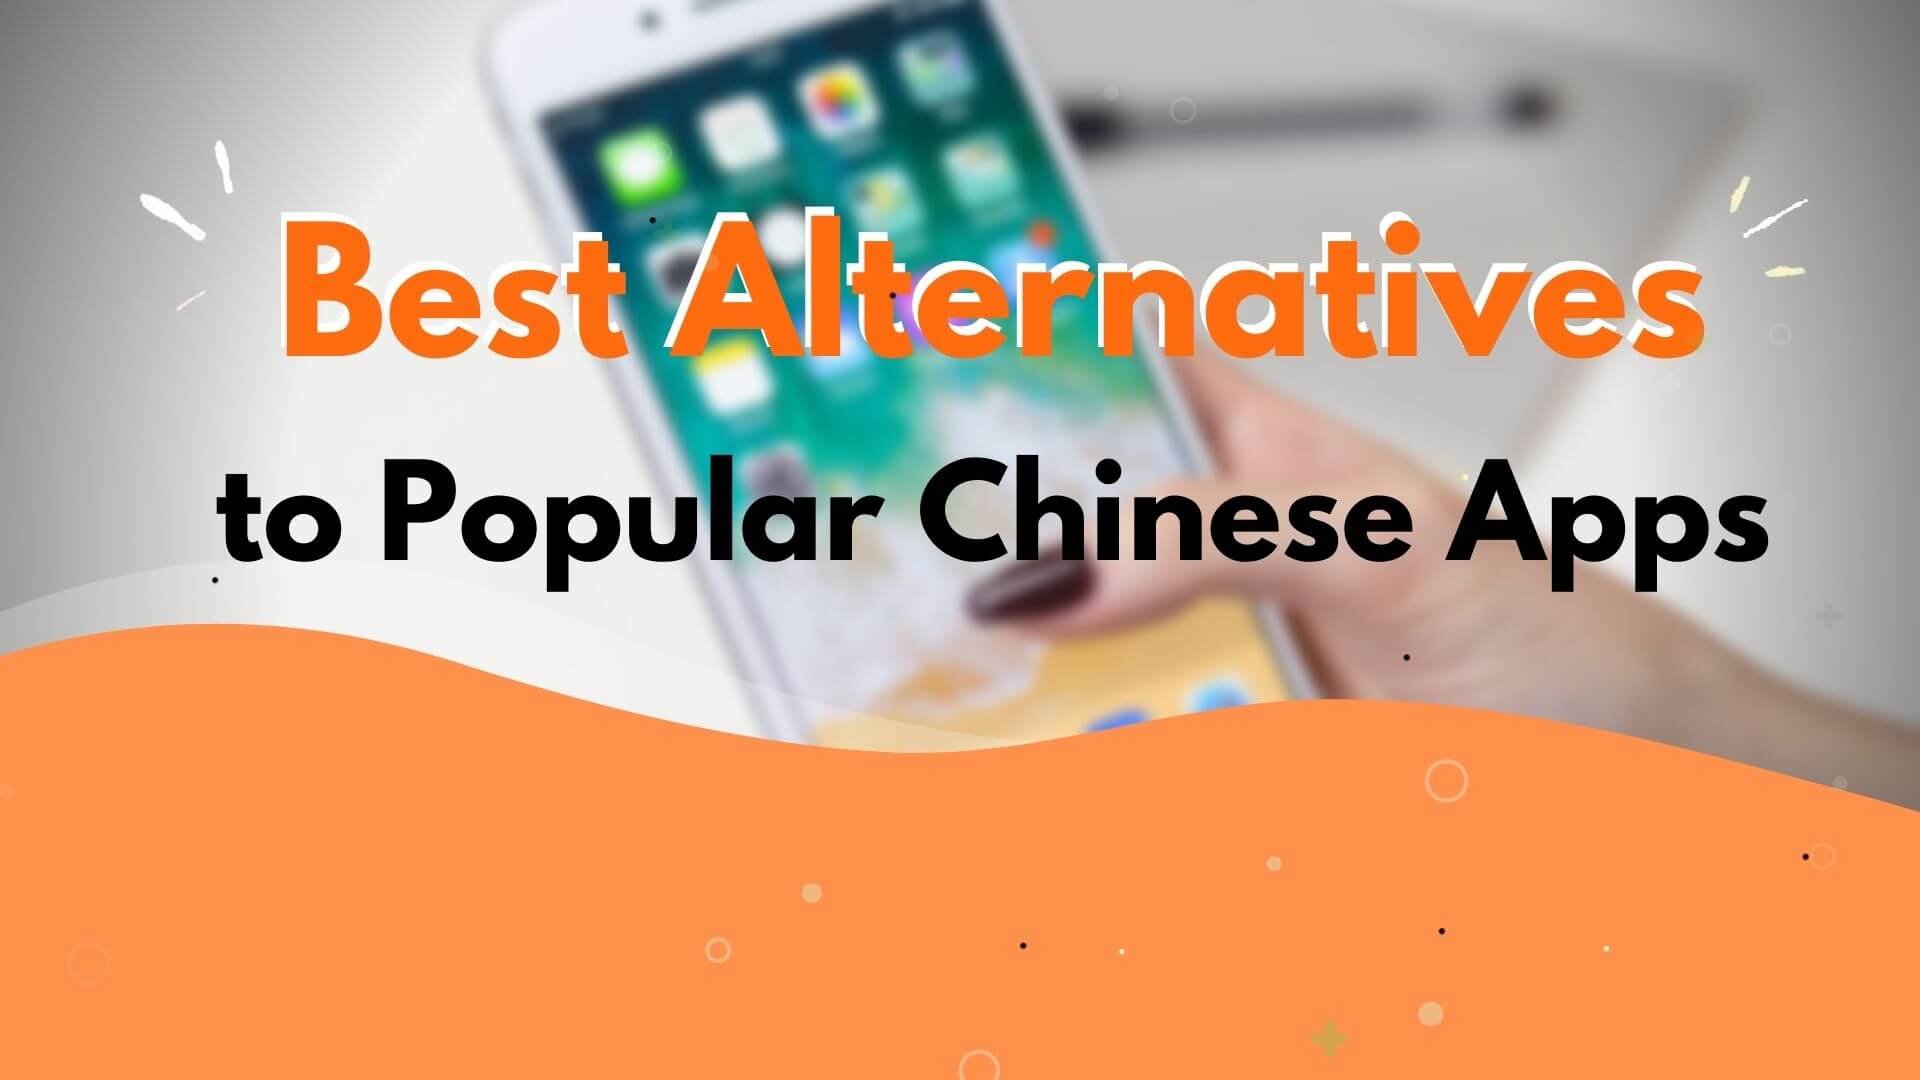 5 Best Alternatives to Popular Chinese Apps